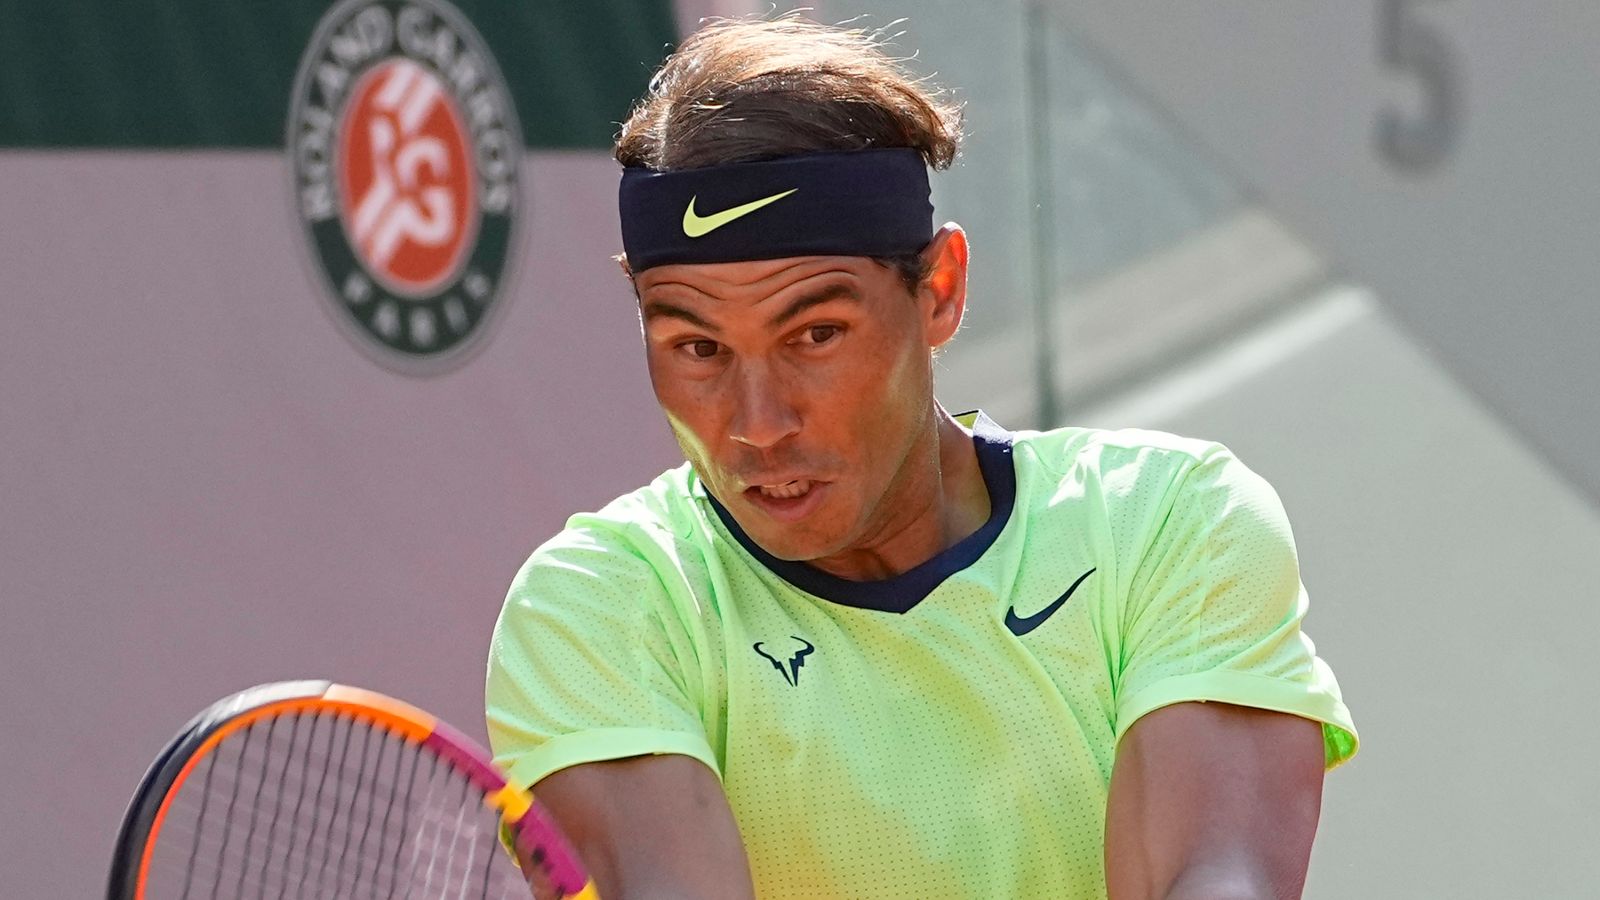 Rafael Nadal withdraws from Wimbledon and Tokyo 2020 in order to help ‘prolong career’